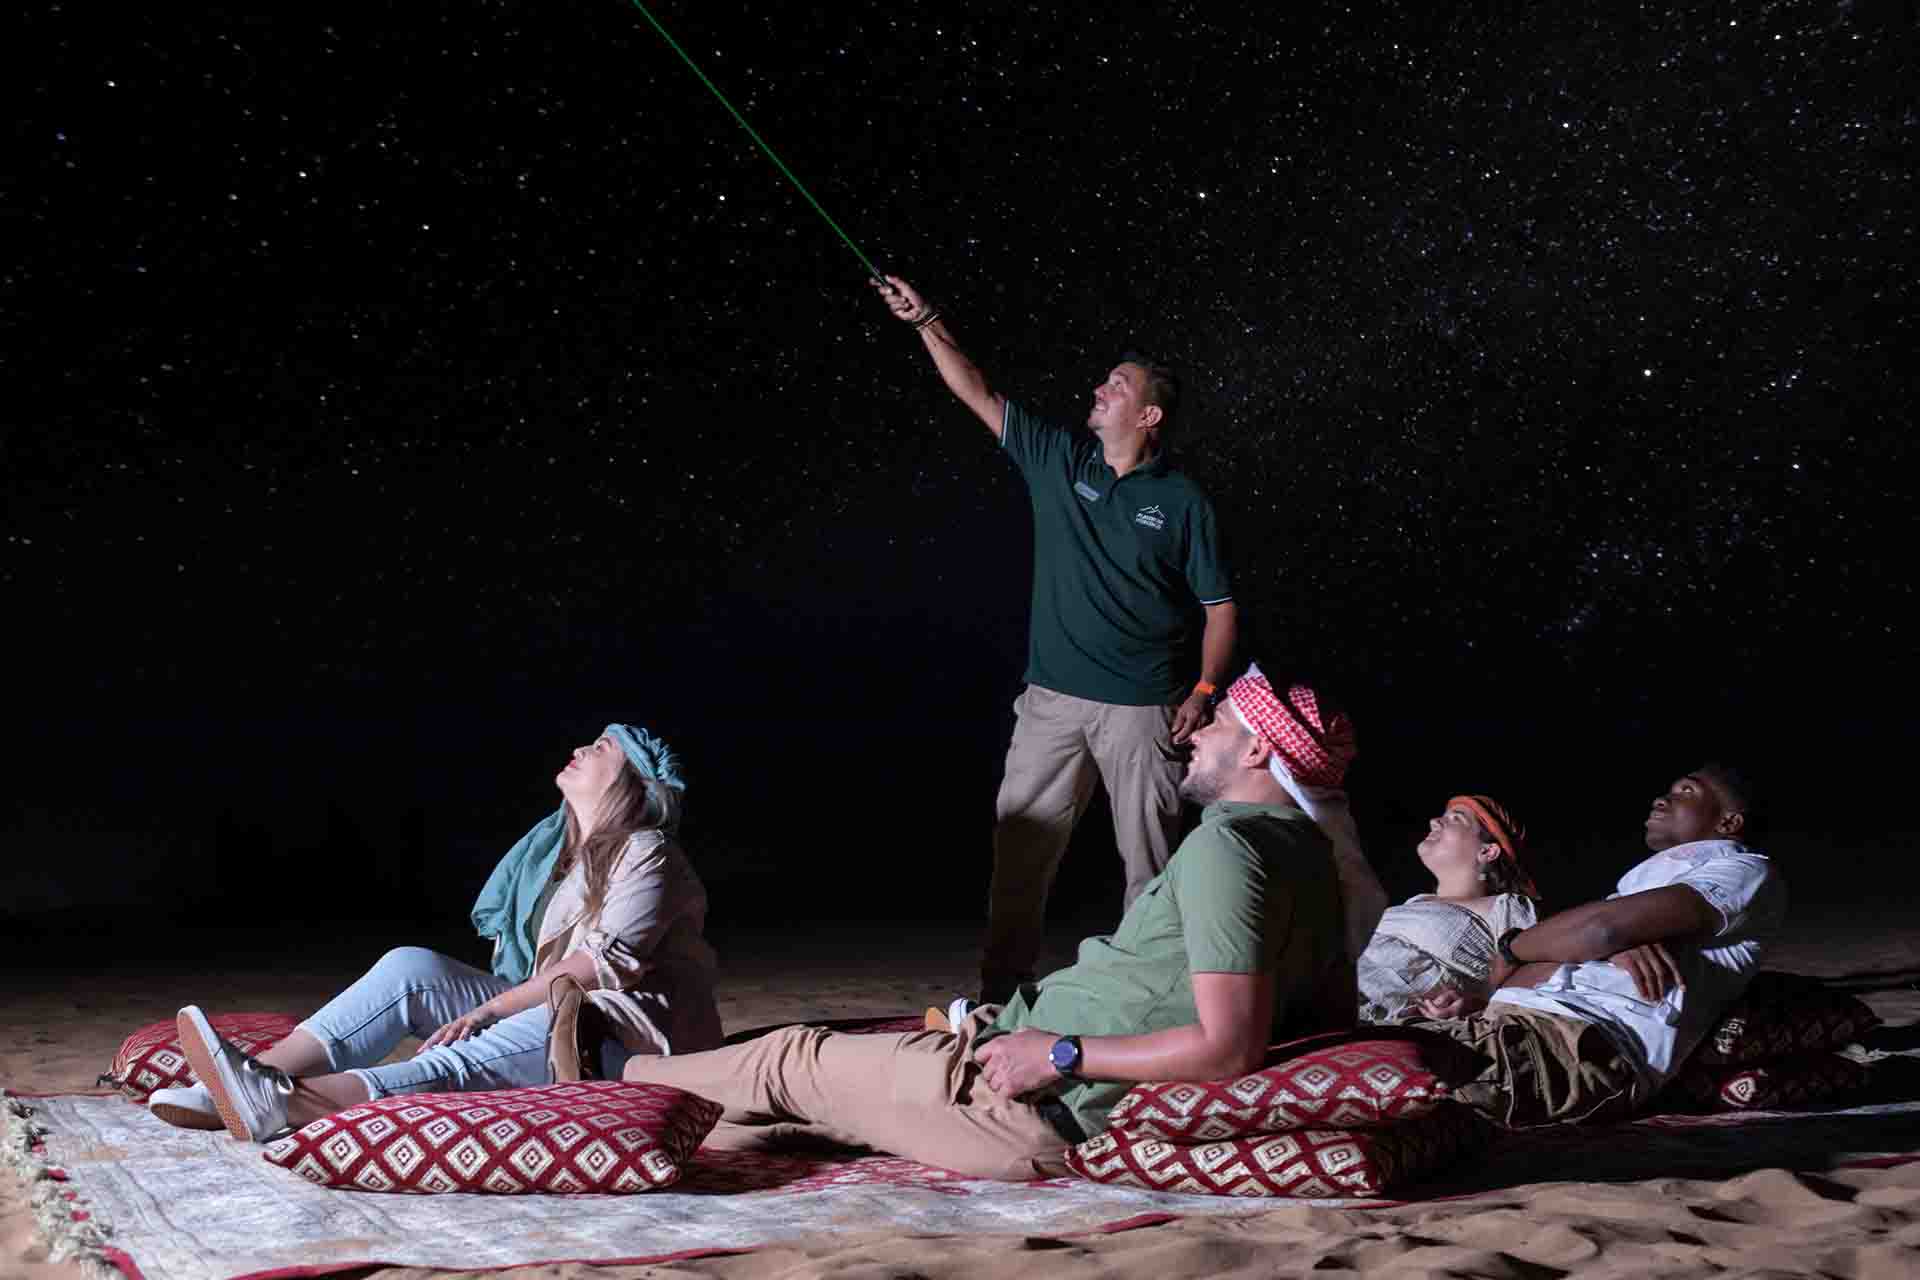 Marvel at the Sky with a Stargazing Session